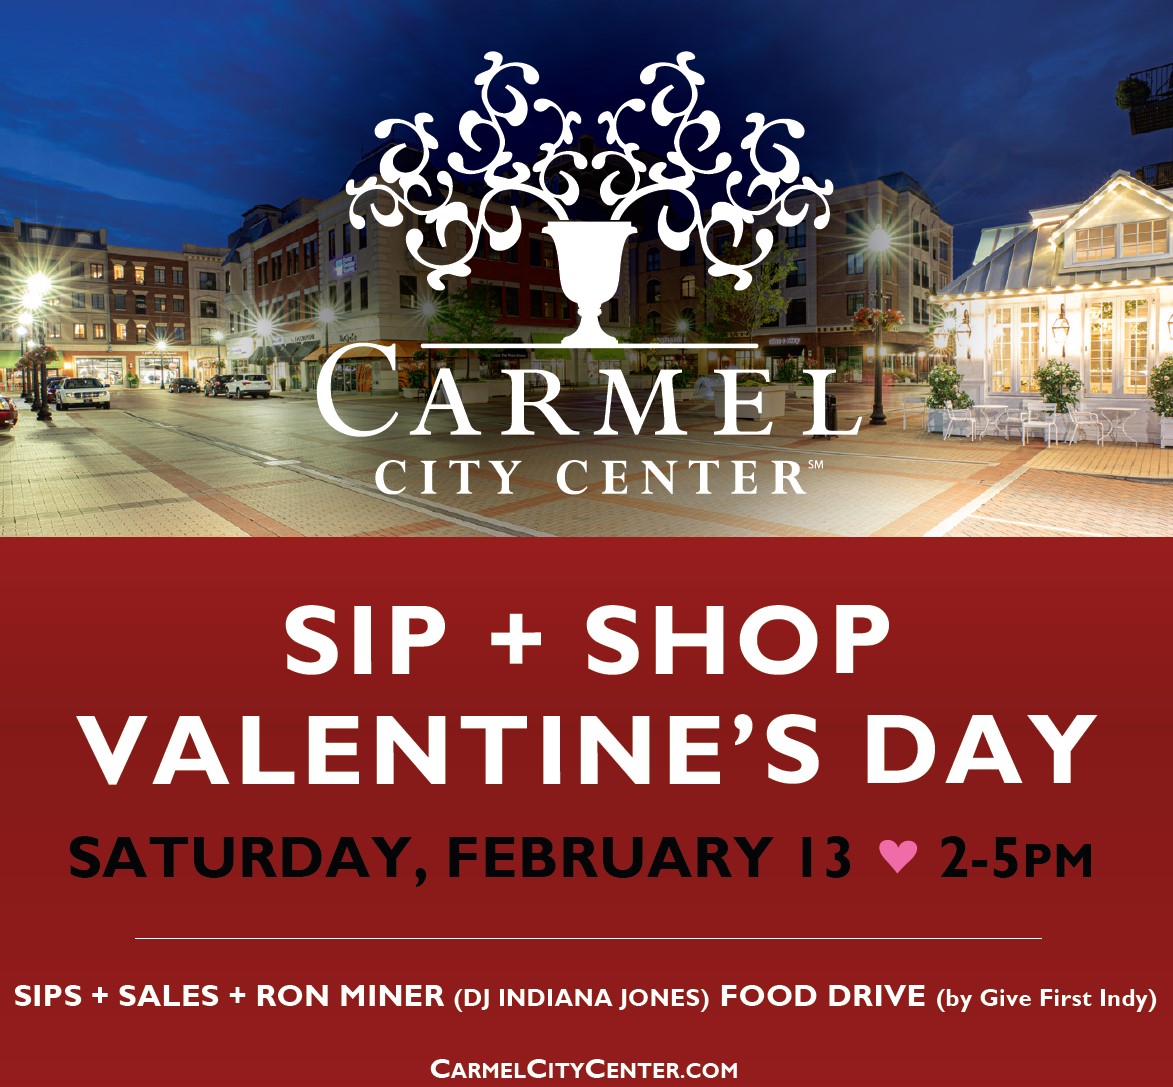 Join the Shops at CCC on Feb. 13th from 2-5 p.m.💘 Sip on complimentary cocktails🥂 and white wine while enjoying sales 🏷️at participating Shops! Bring your non-perishable food items for the Give First Indy local food drive🛒. Learn more by visiting our website (Link in bio).